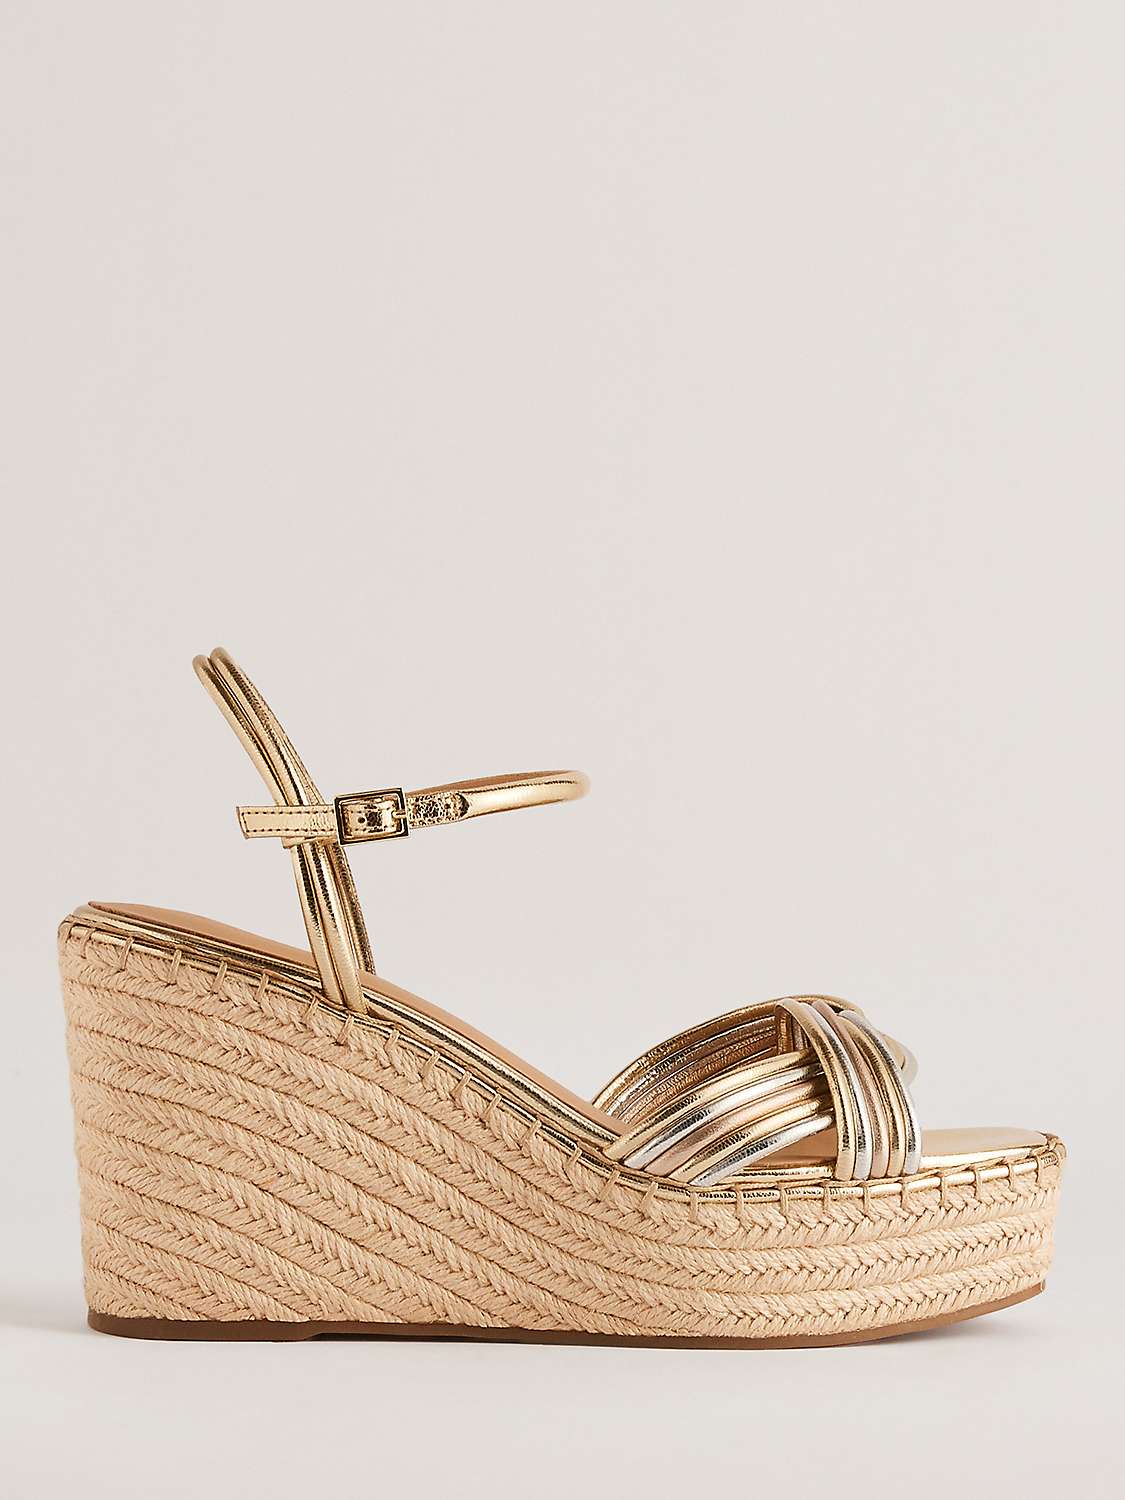 Buy Ted Baker Amaalia Cross Strap Leather Wedge Sandals, Rose Gold/Silver Online at johnlewis.com